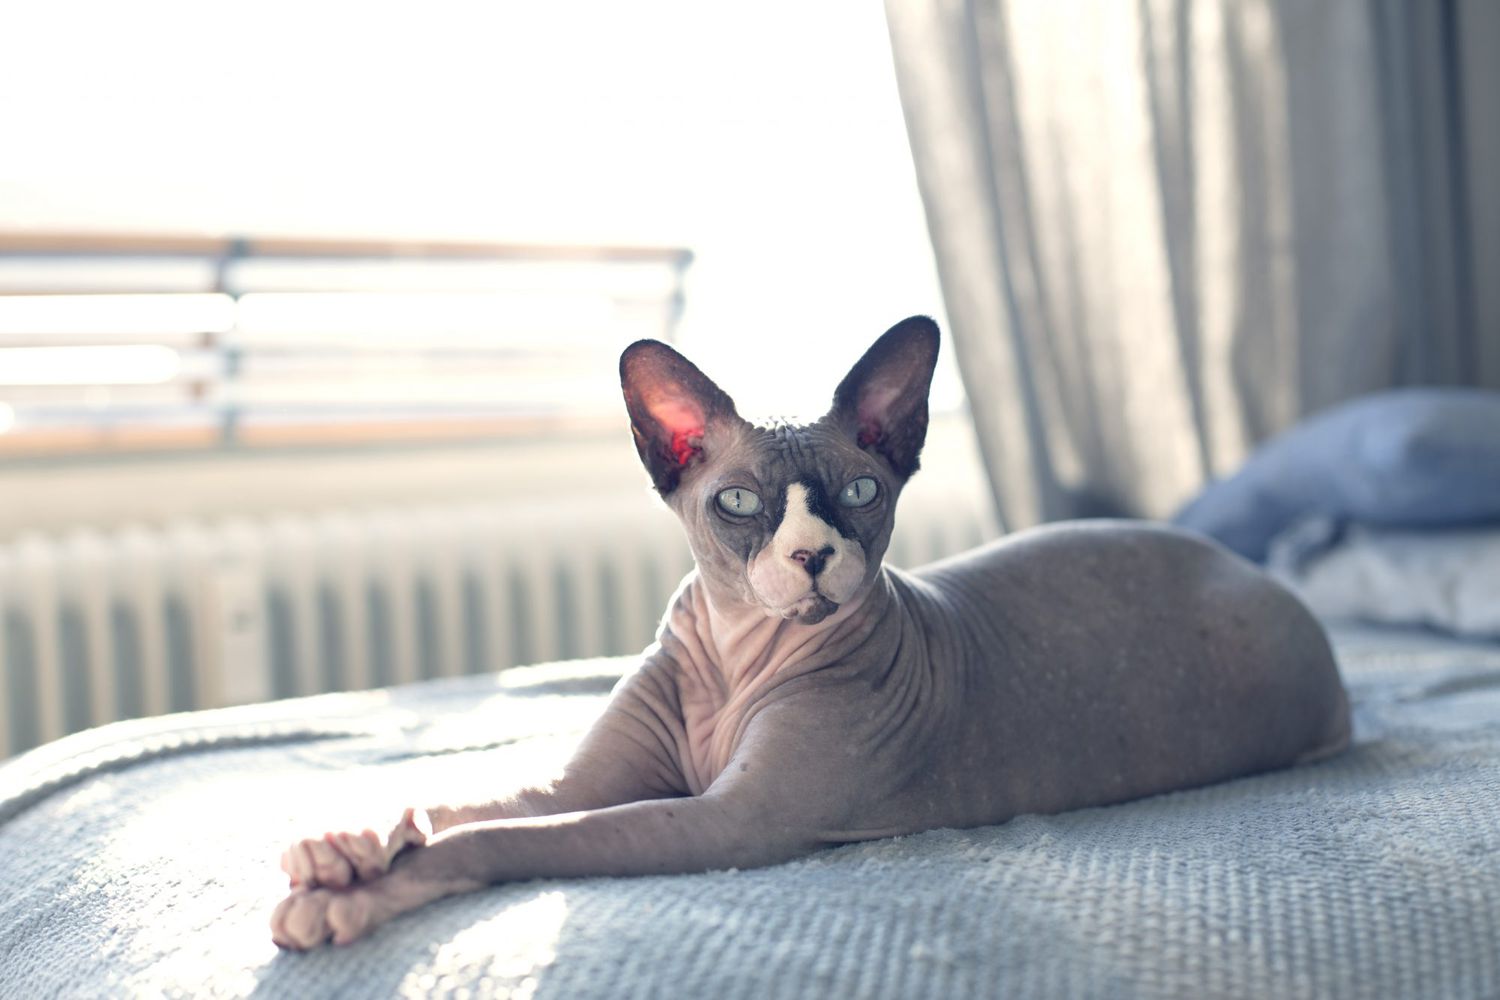 hairless syphnxcat on bed